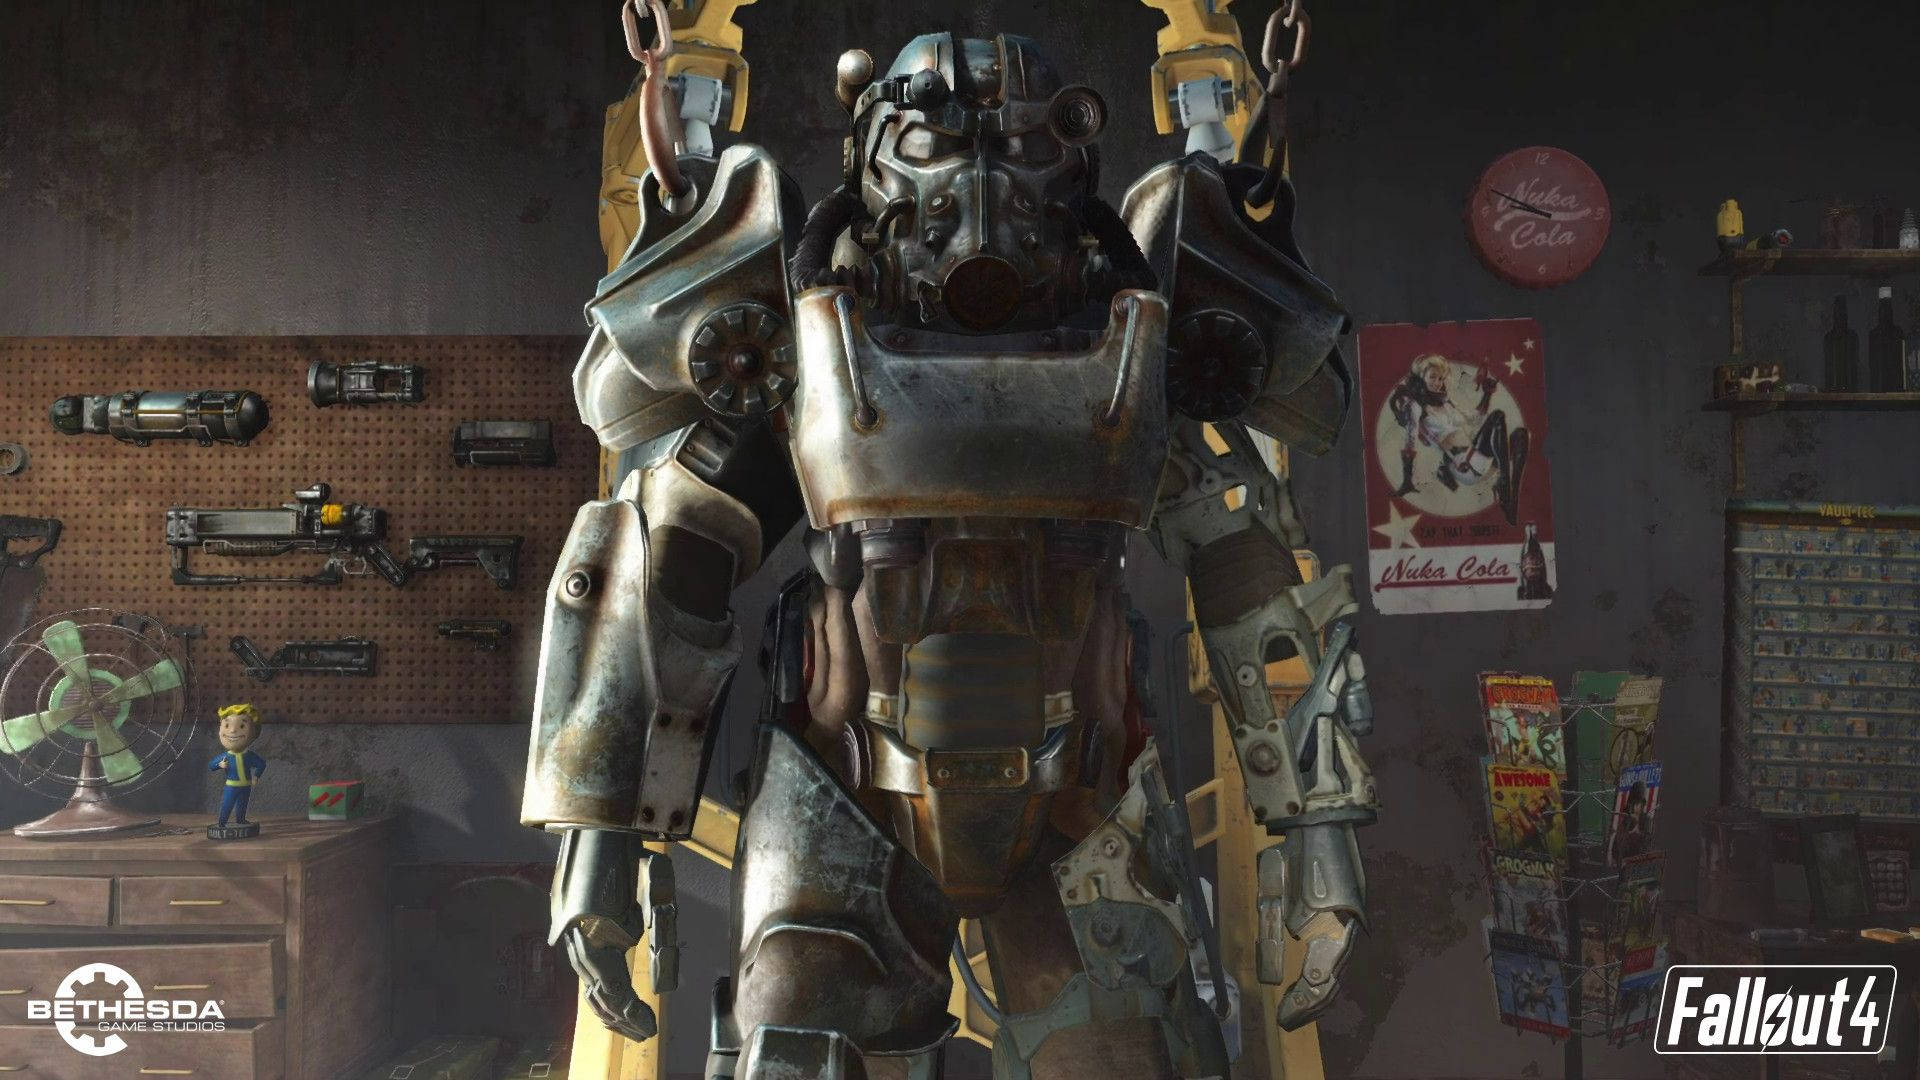 "The Chained Power Armor - A symbol of strength and power in the post-apocalyptic world of Fallout 4." Wallpaper